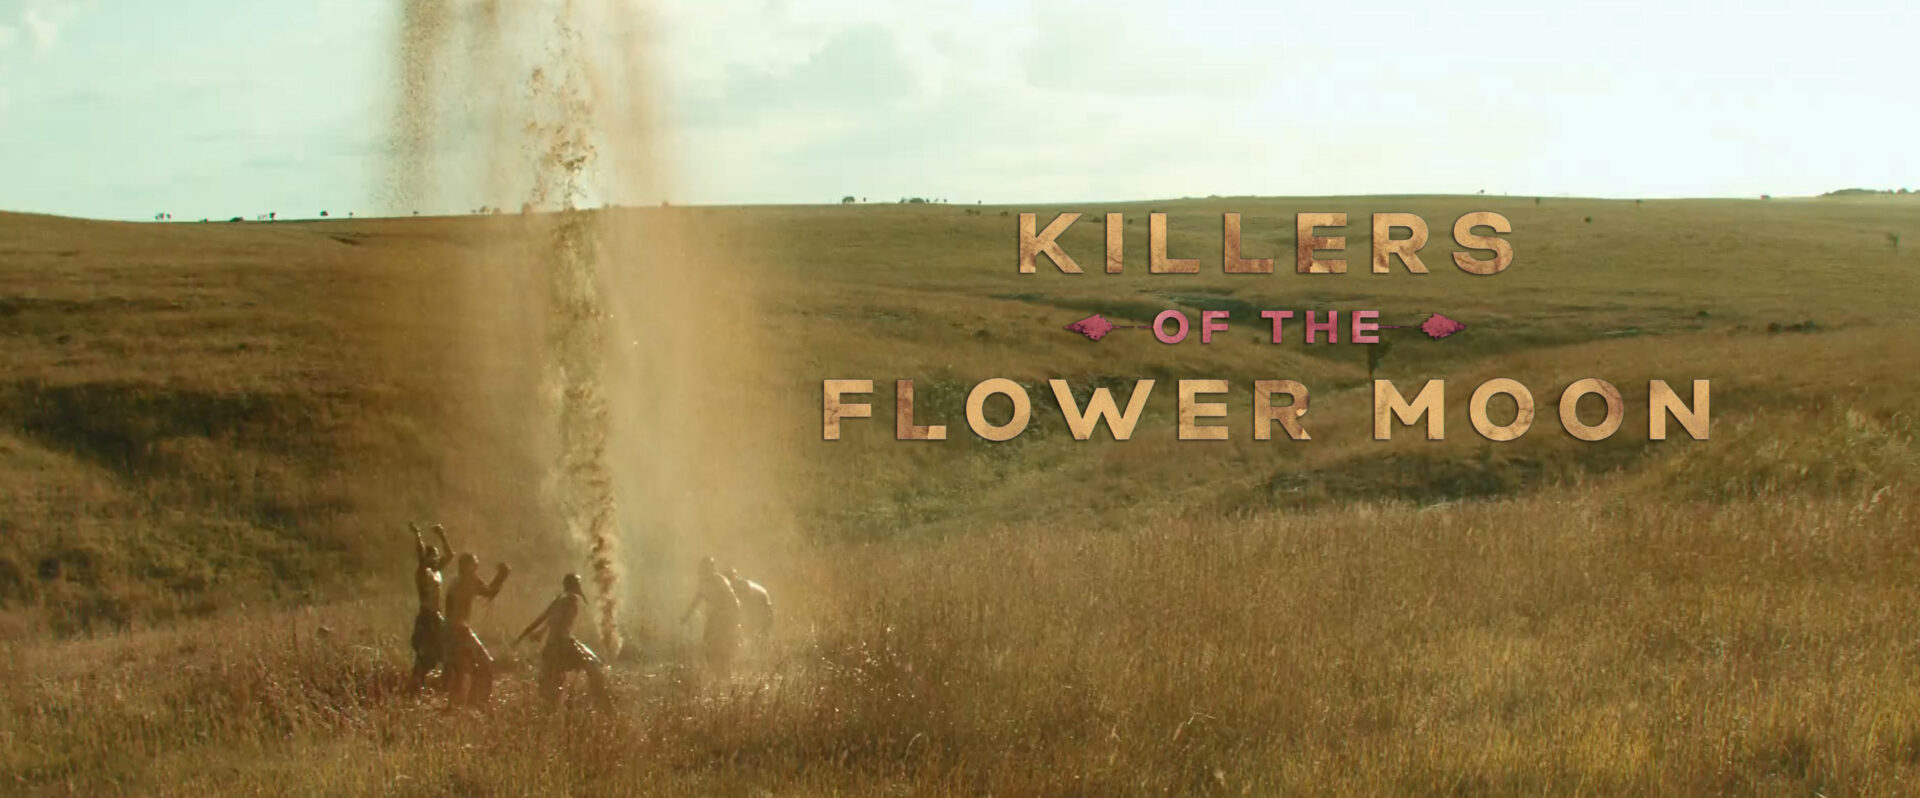 killers of the flower moon theatrical trailer